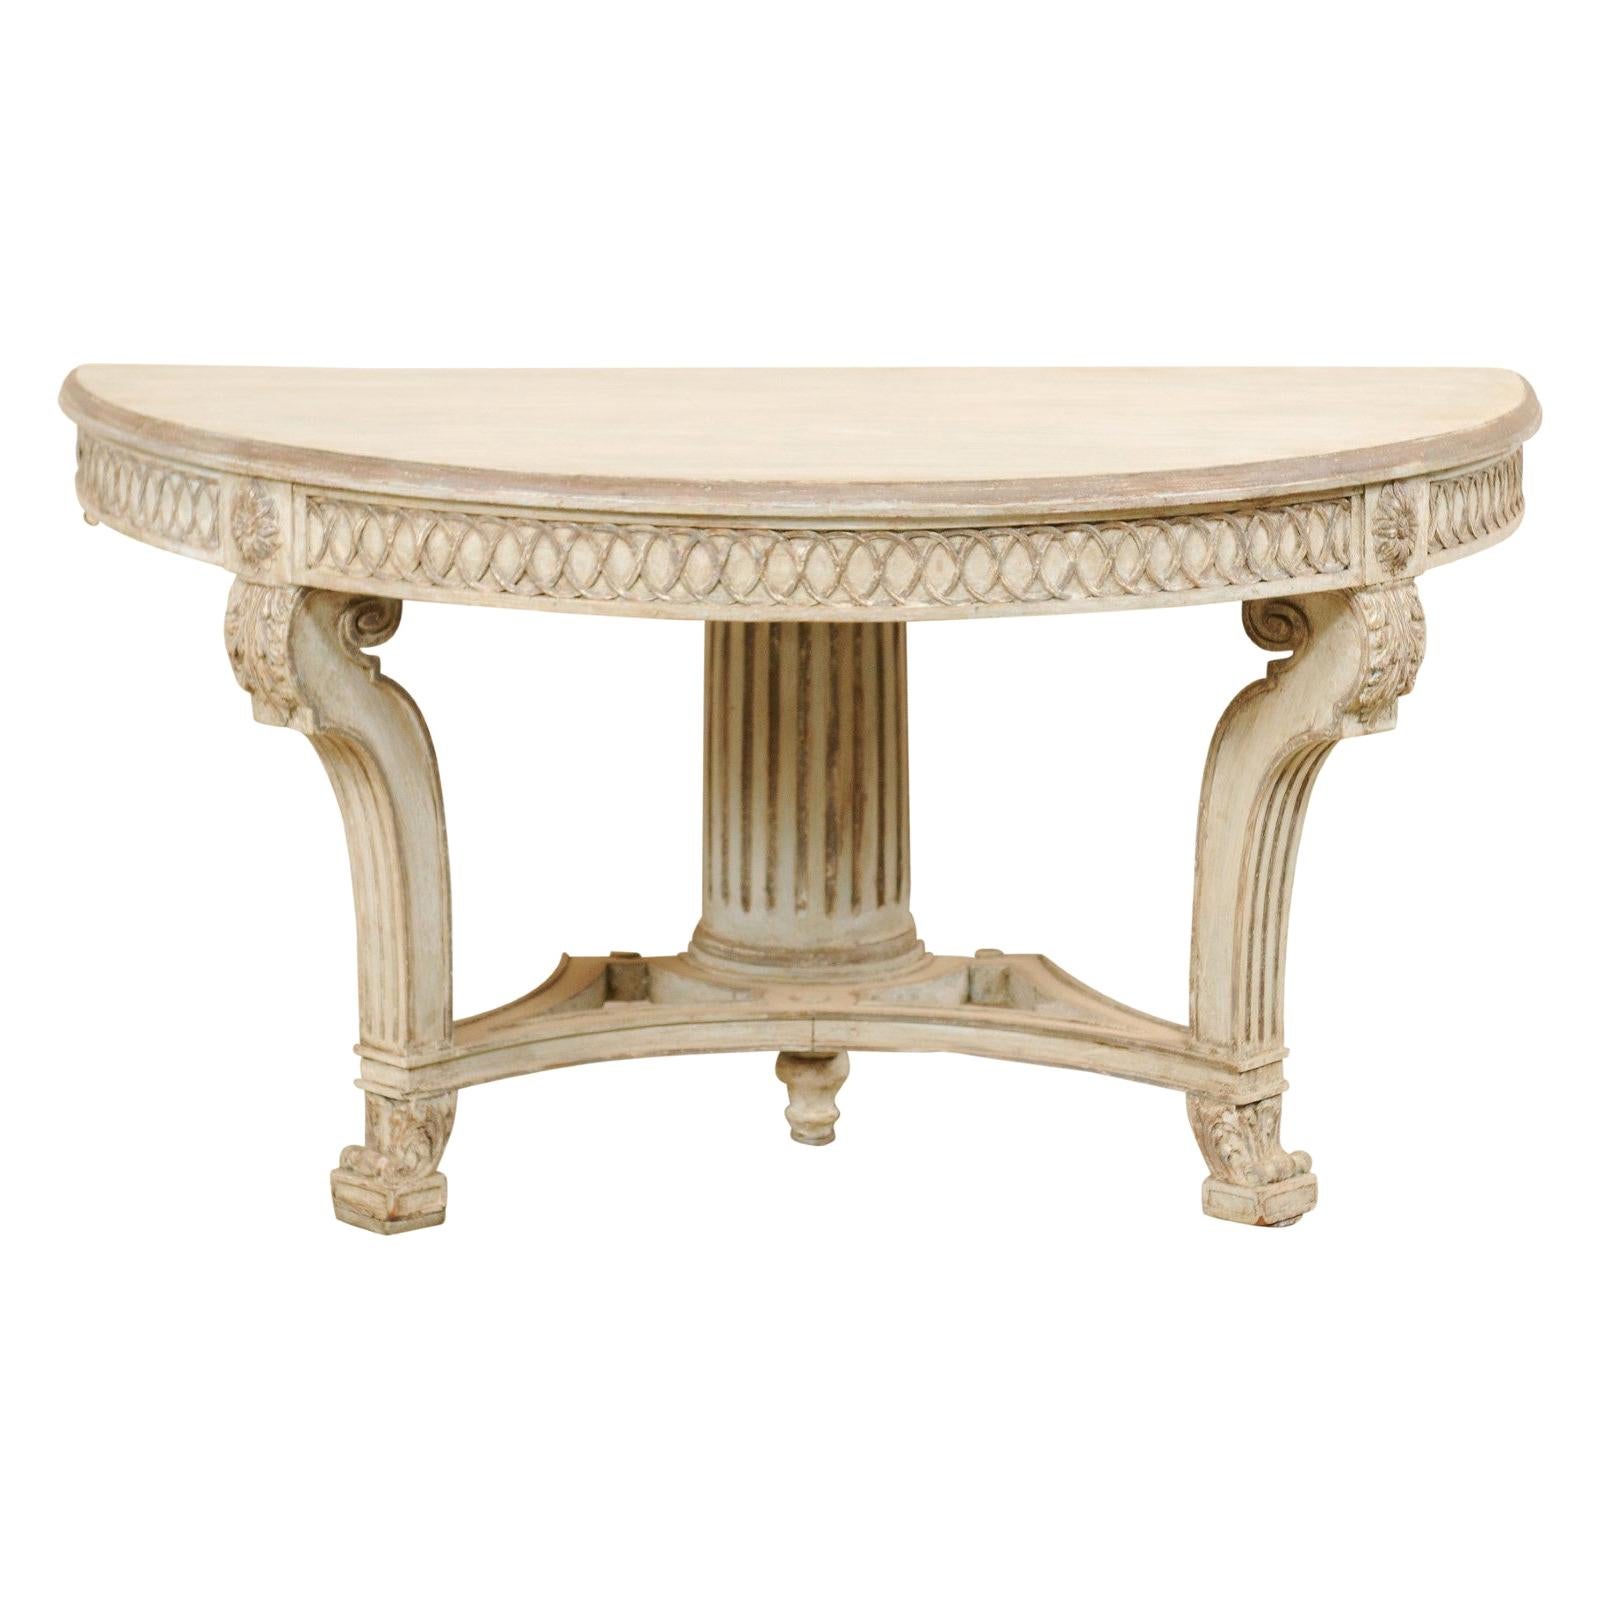 Italian Demi-Lune Console Table w/Beautifully Carved Adornment & Fluted Column